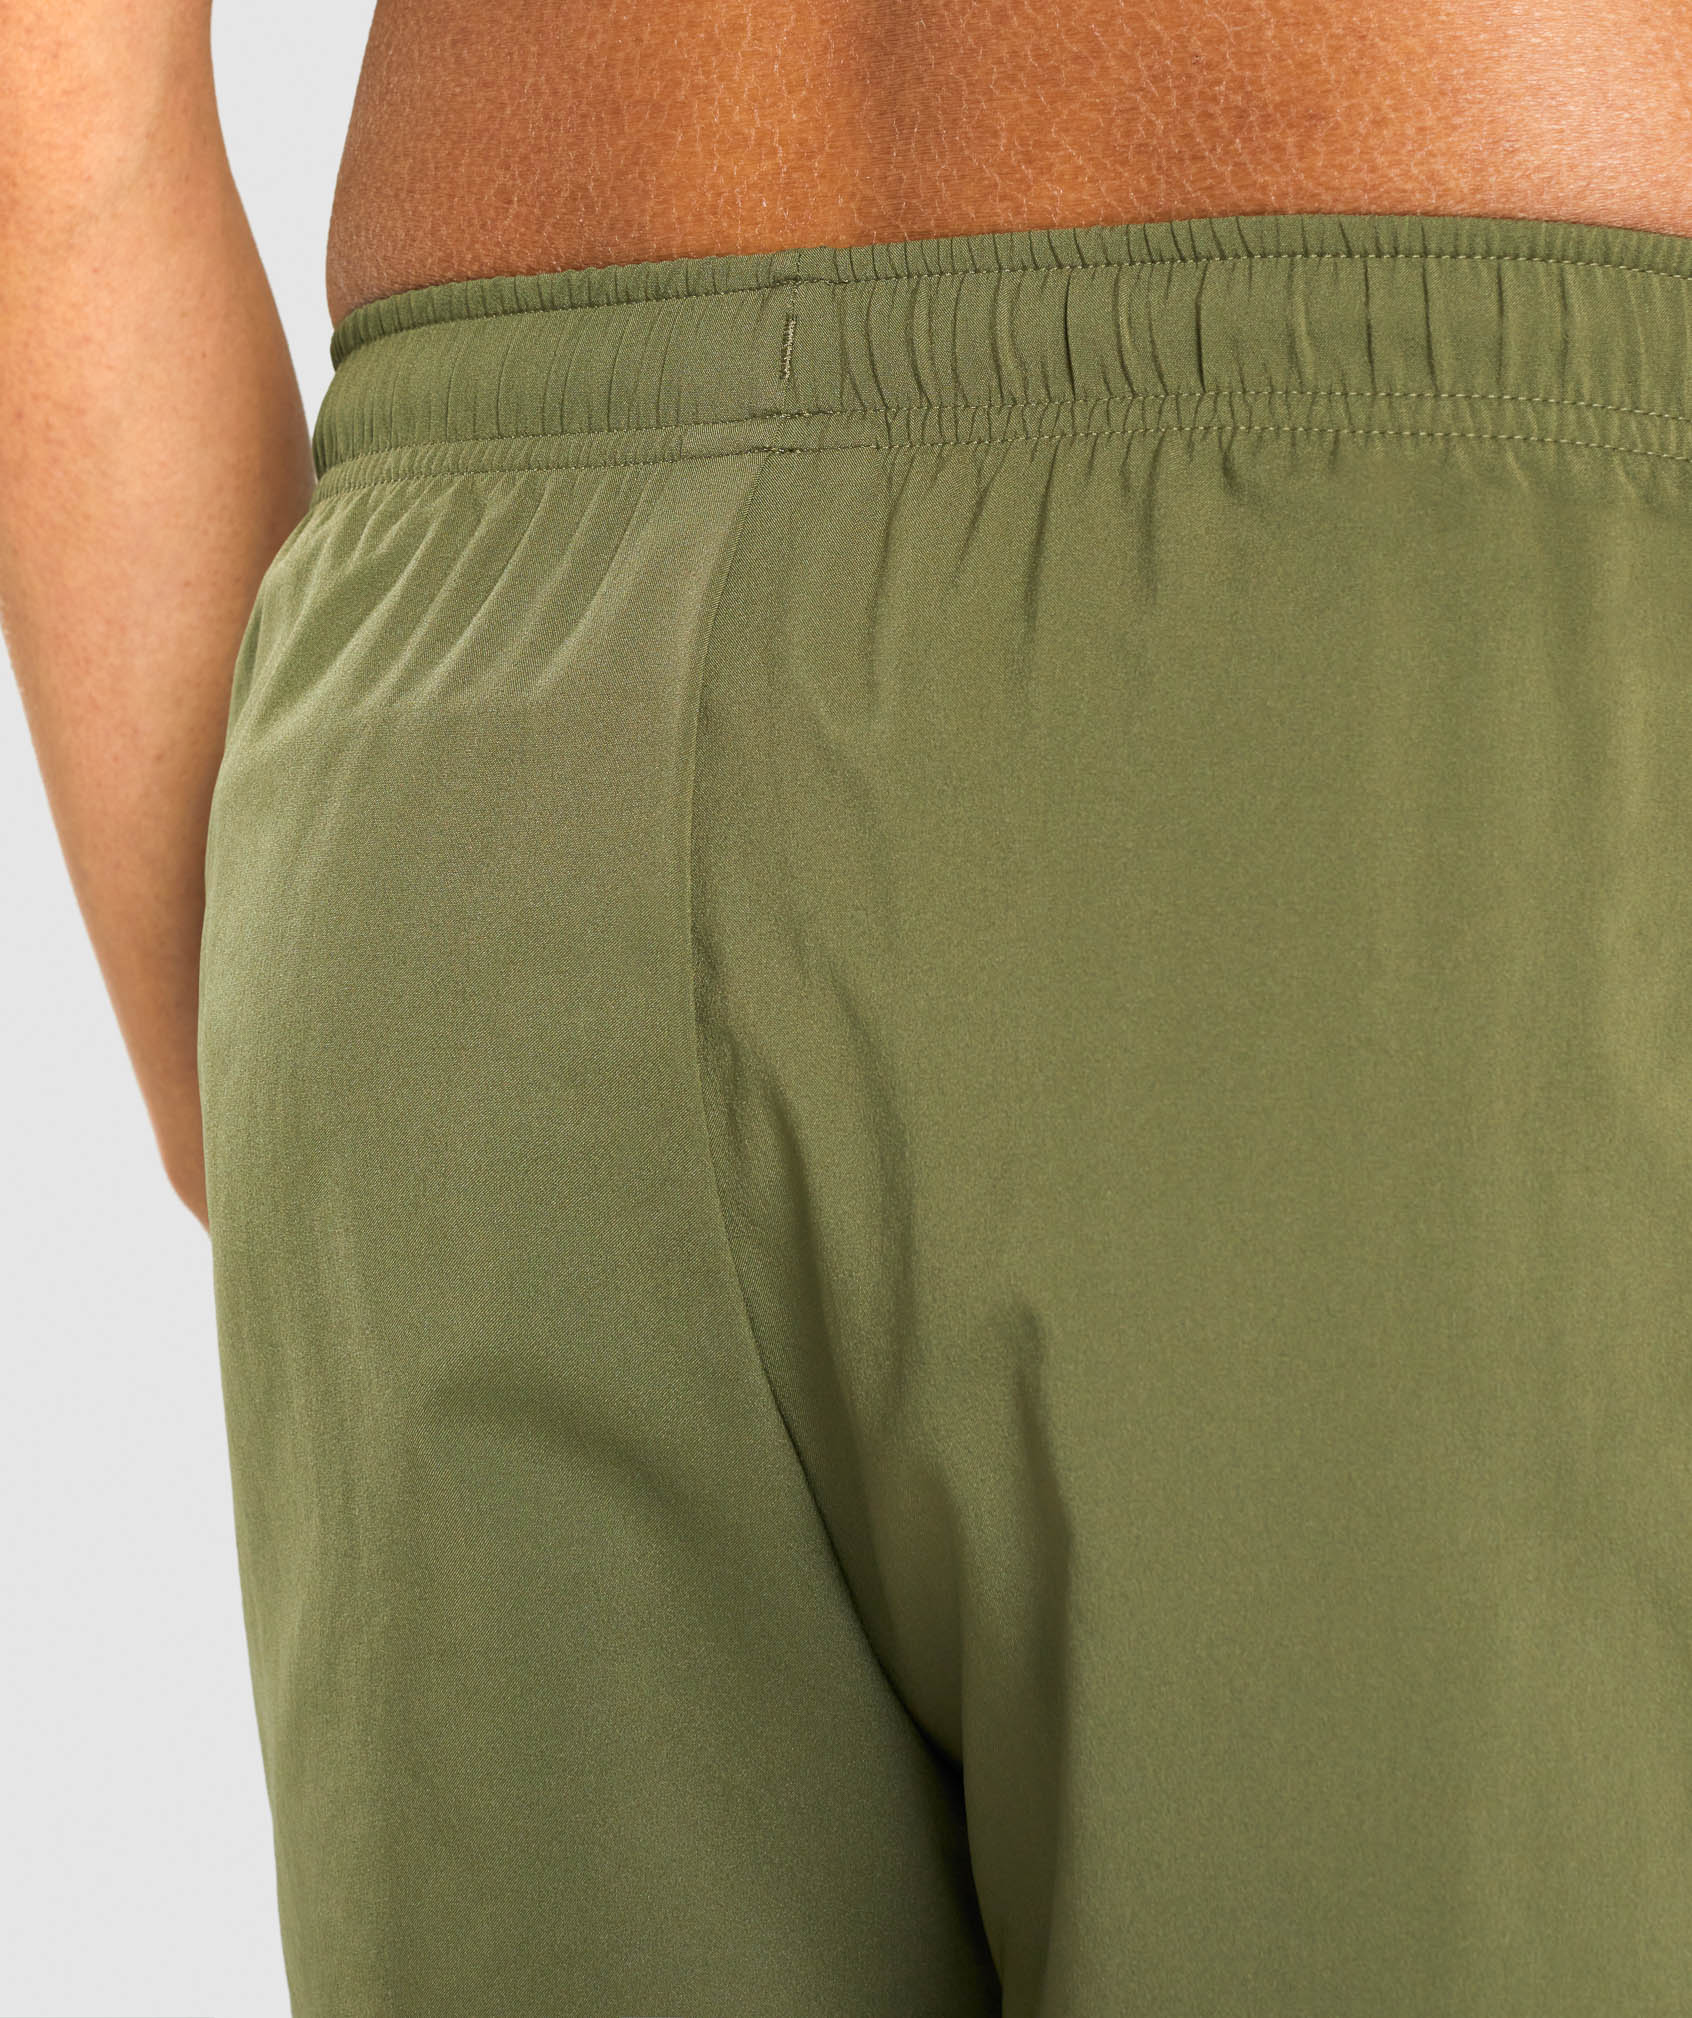 Arrival 5" Shorts in Dark Green - view 6